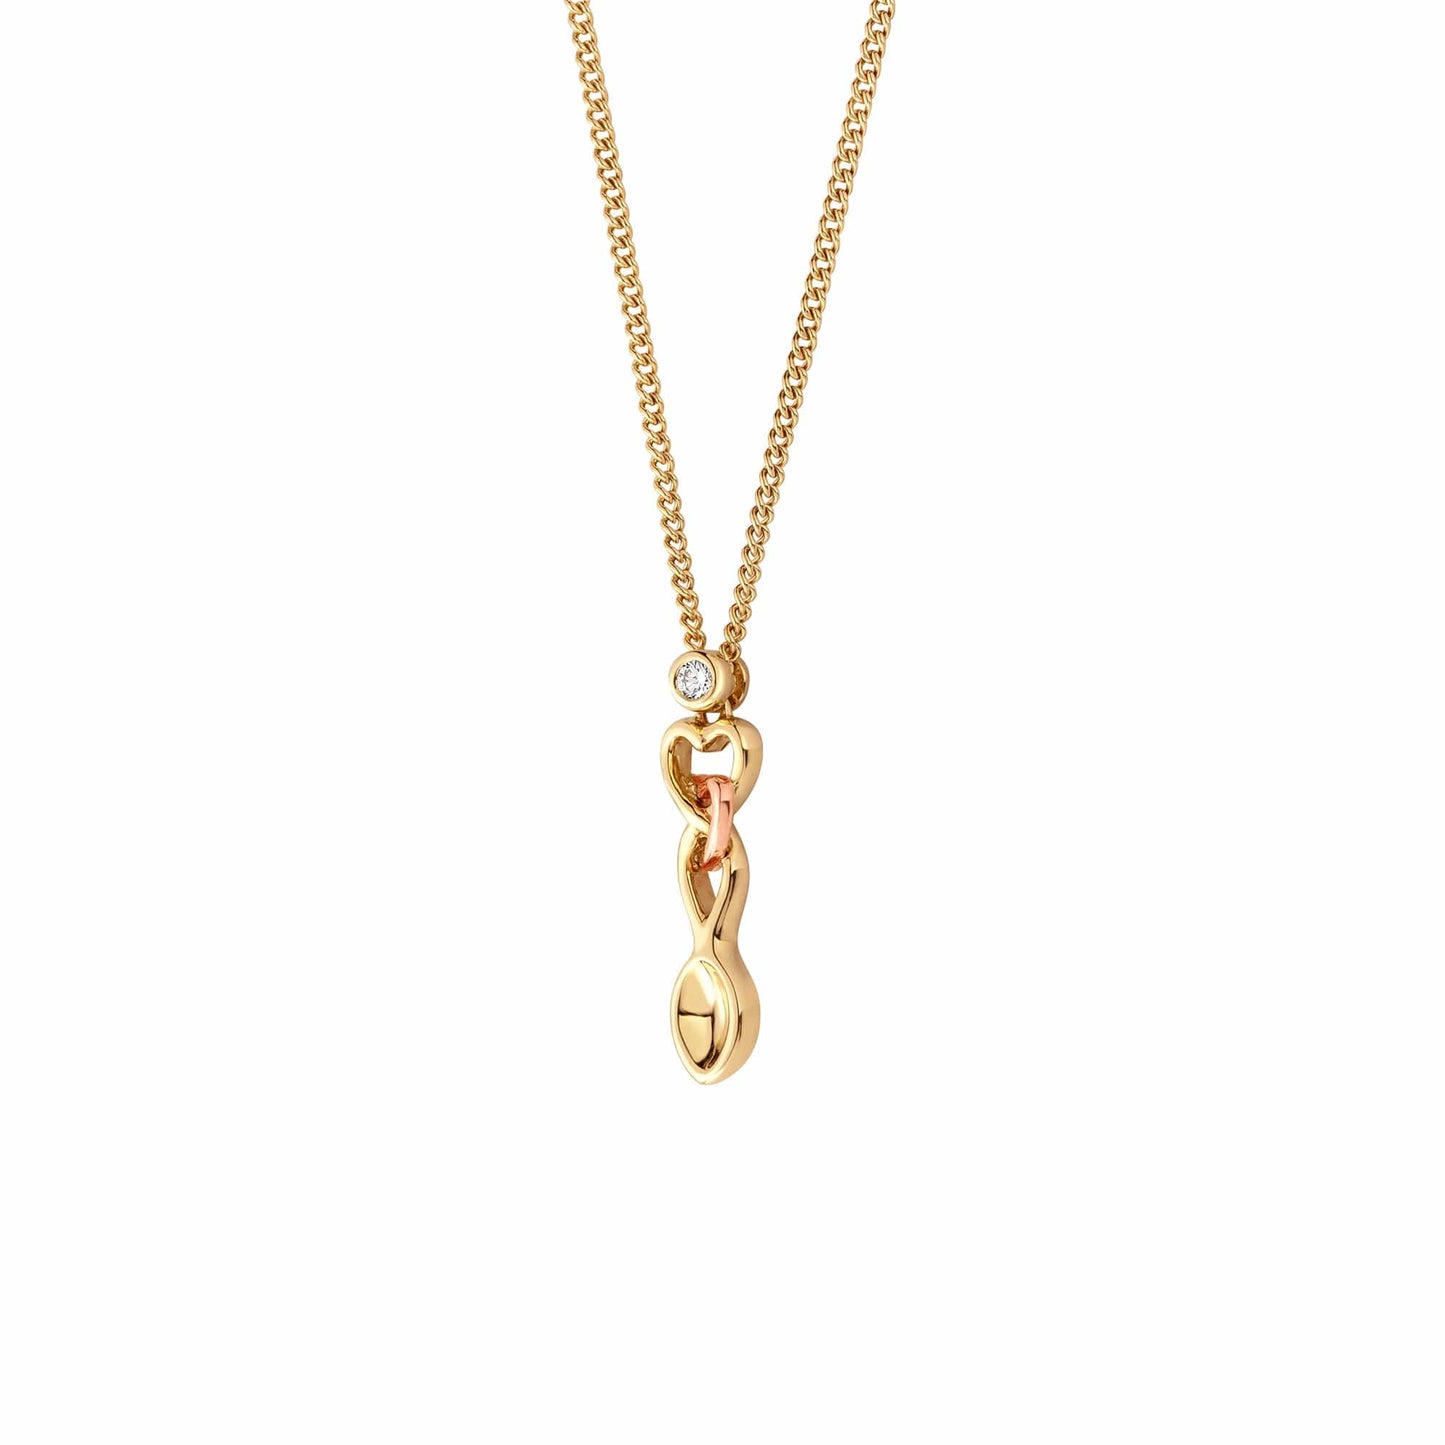 Lovespoons Gold and Diamond Pendant